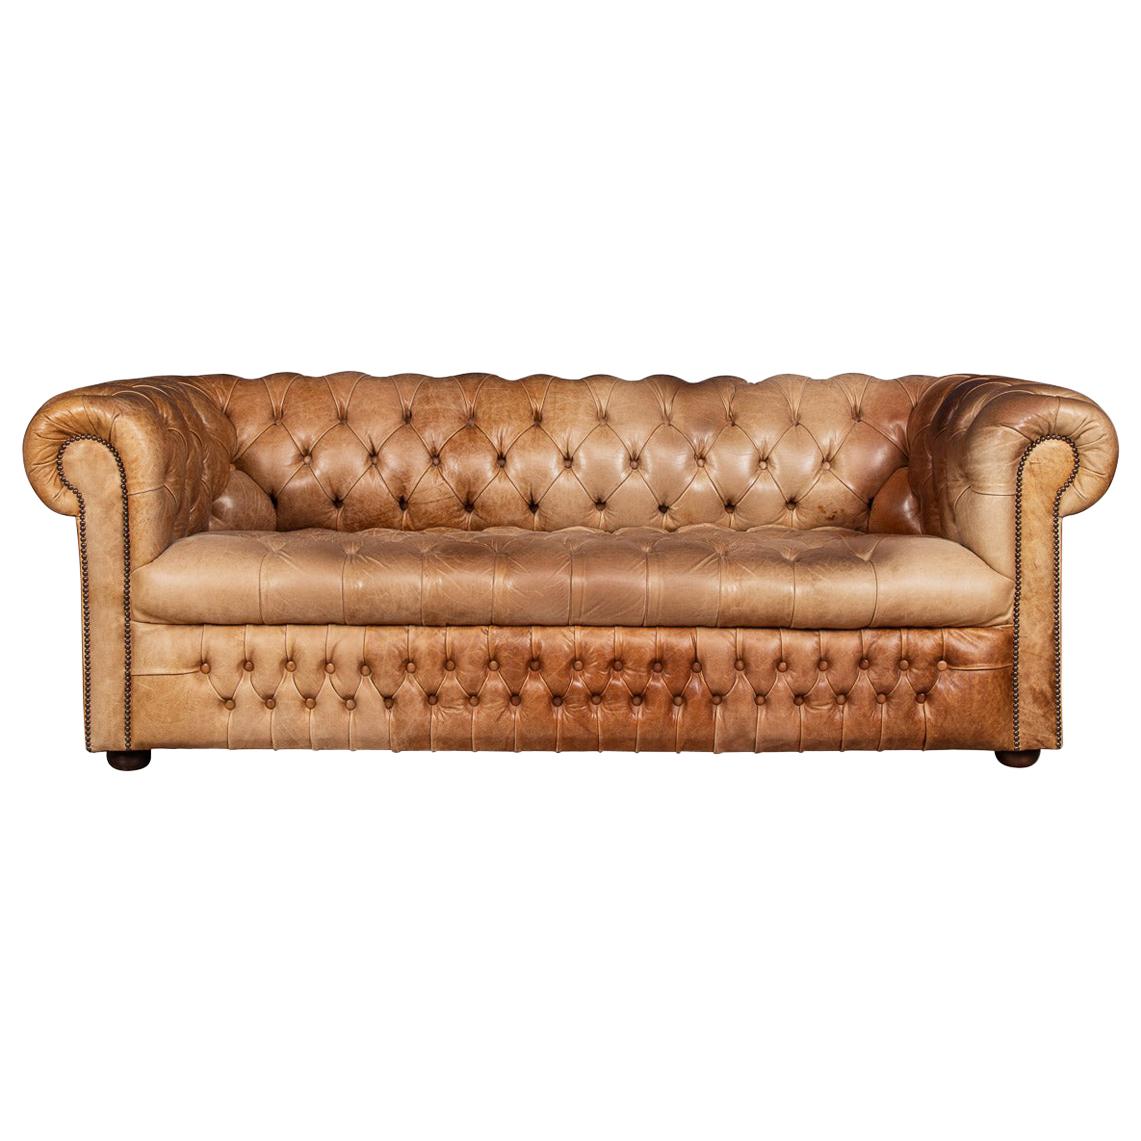 20th Century Leather Chesterfield Sofa with Button Down Seat, circa 1970